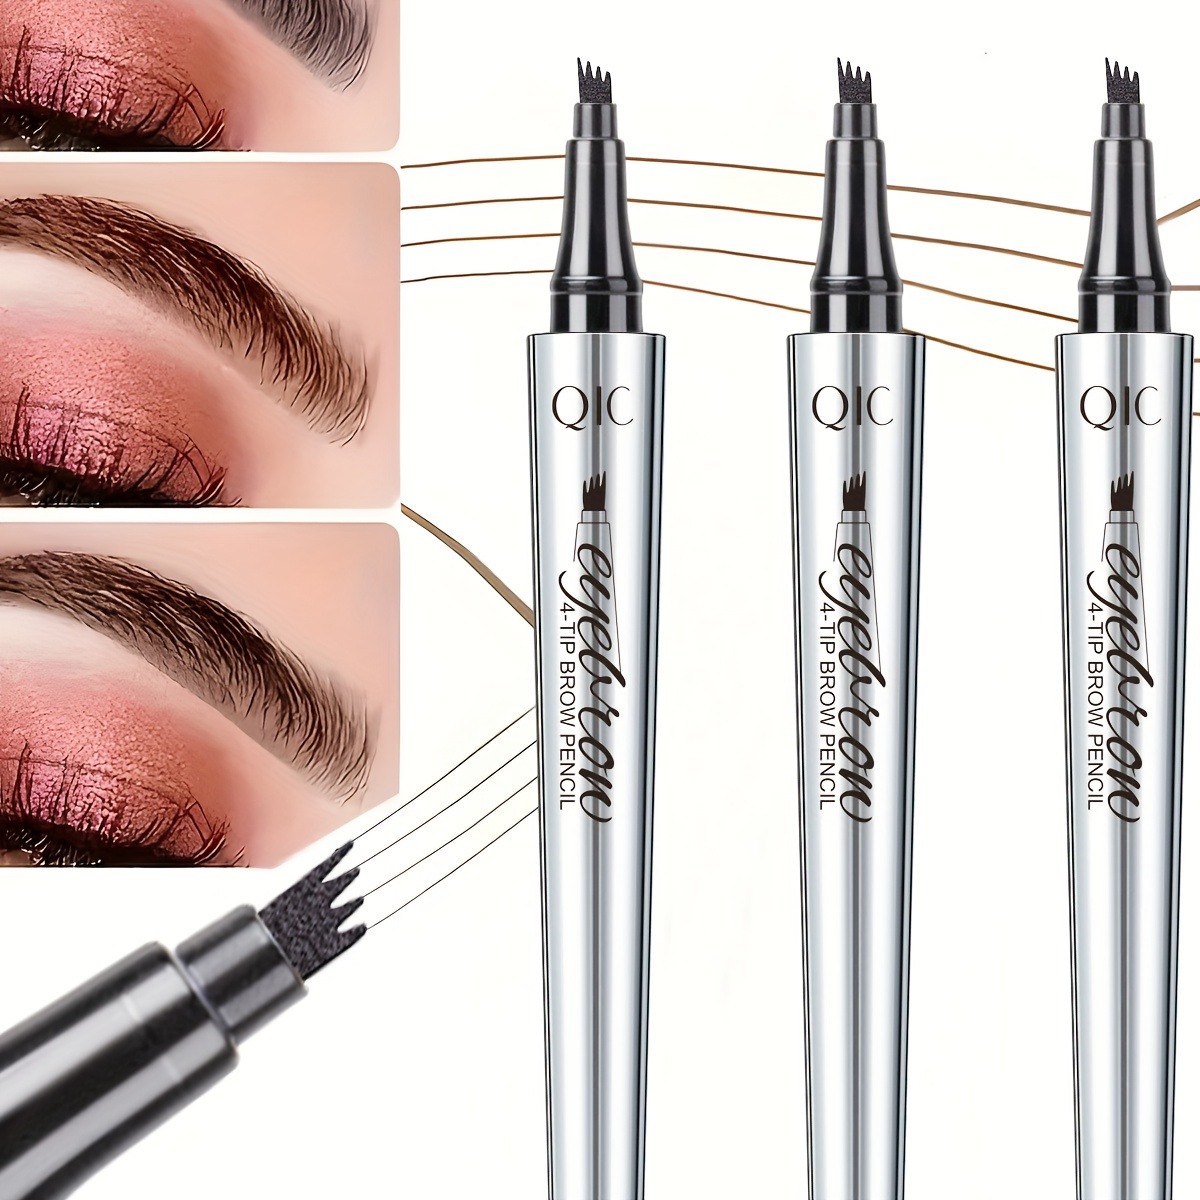 

Waterproof Liquid Eyebrow Pen - 4 Split Head, Smudge-proof Microblading Pencil For Natural Look, Suitable For All Skin Types